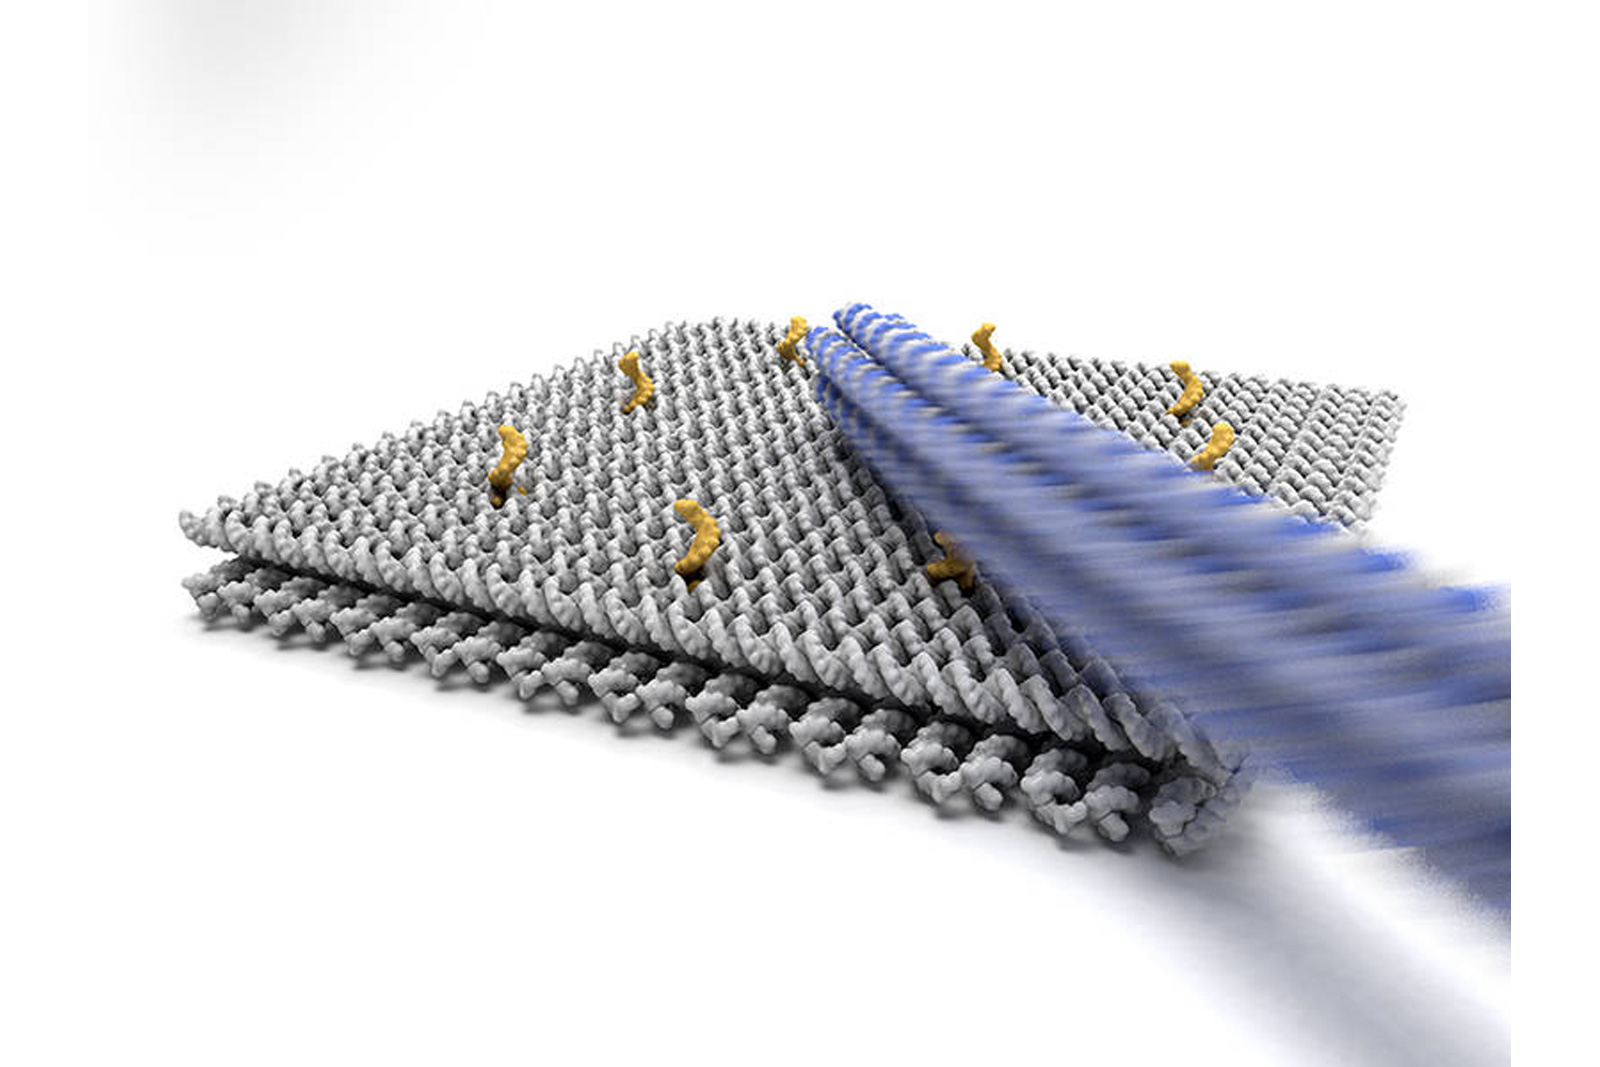 photo of Speedy DNA nanorobot could lead to molecular factories image